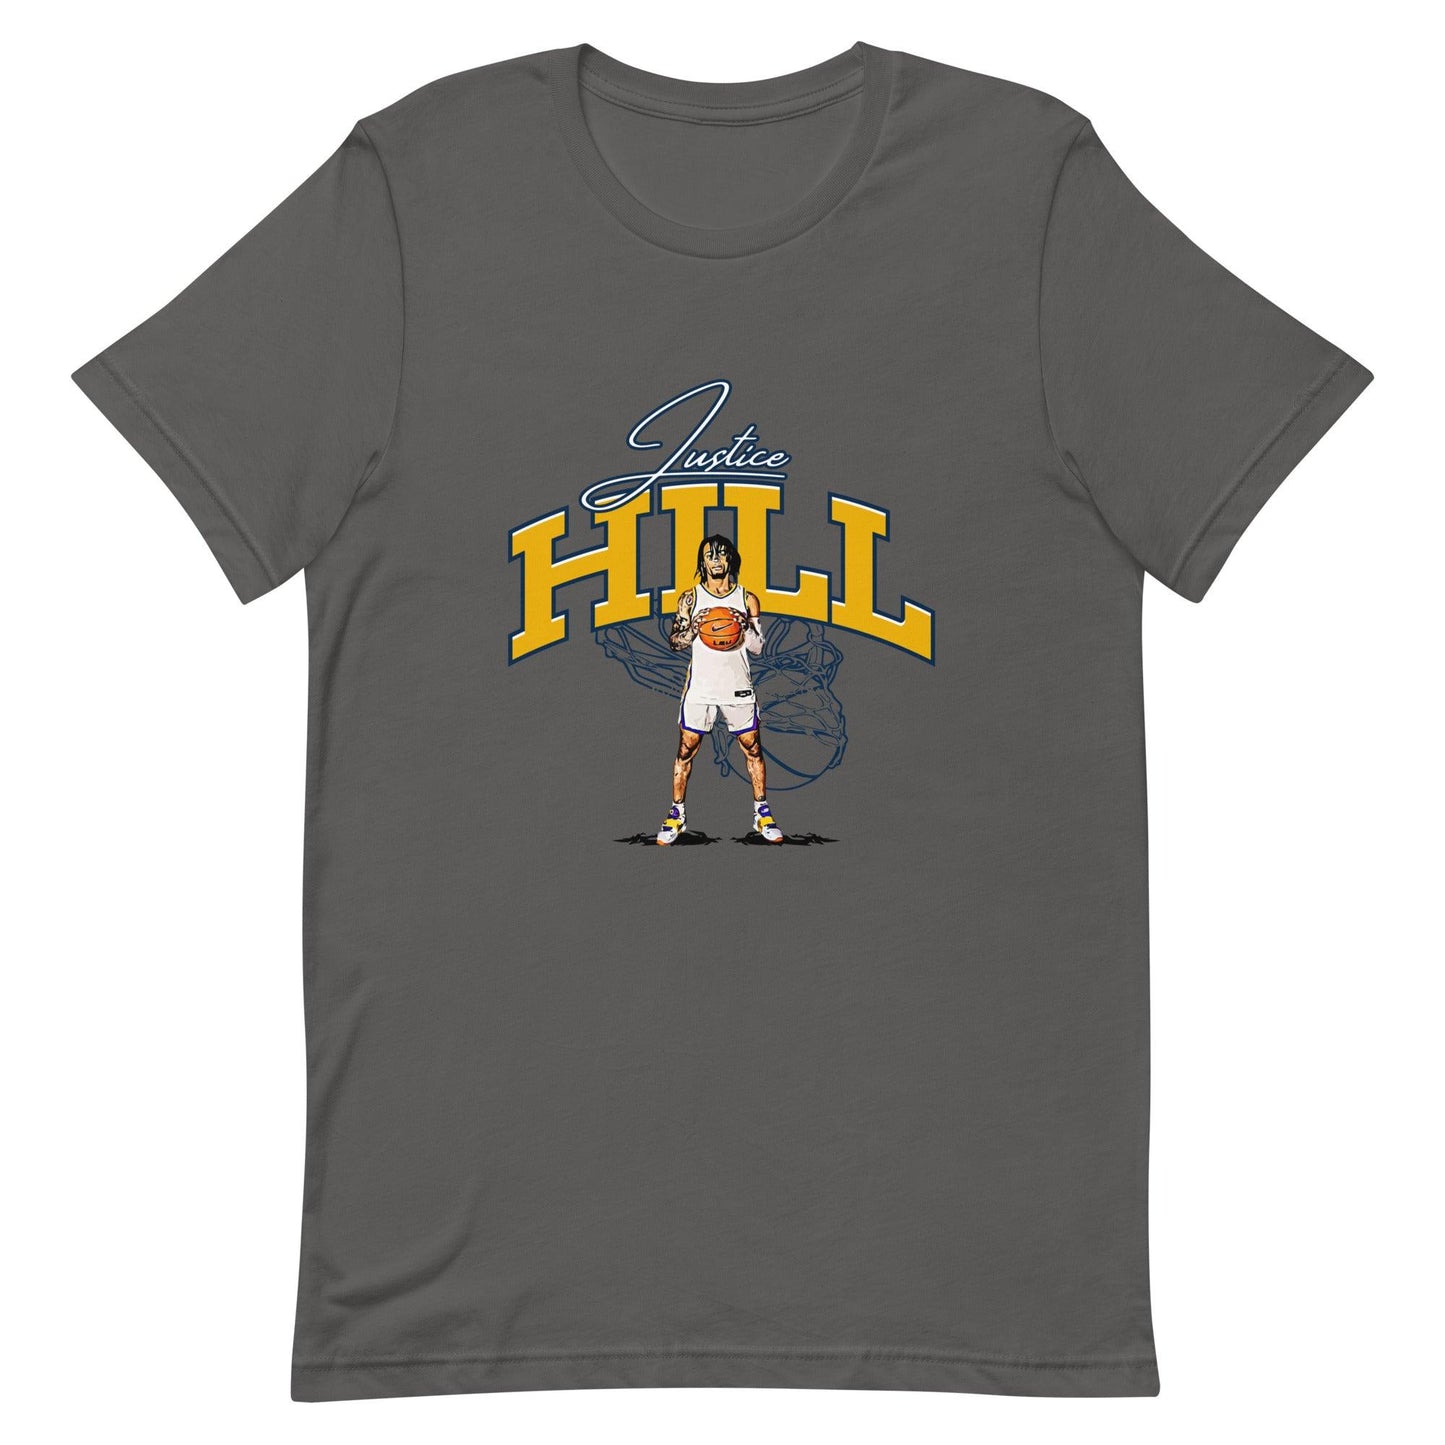 Justice Hill "Gameday" t-shirt - Fan Arch